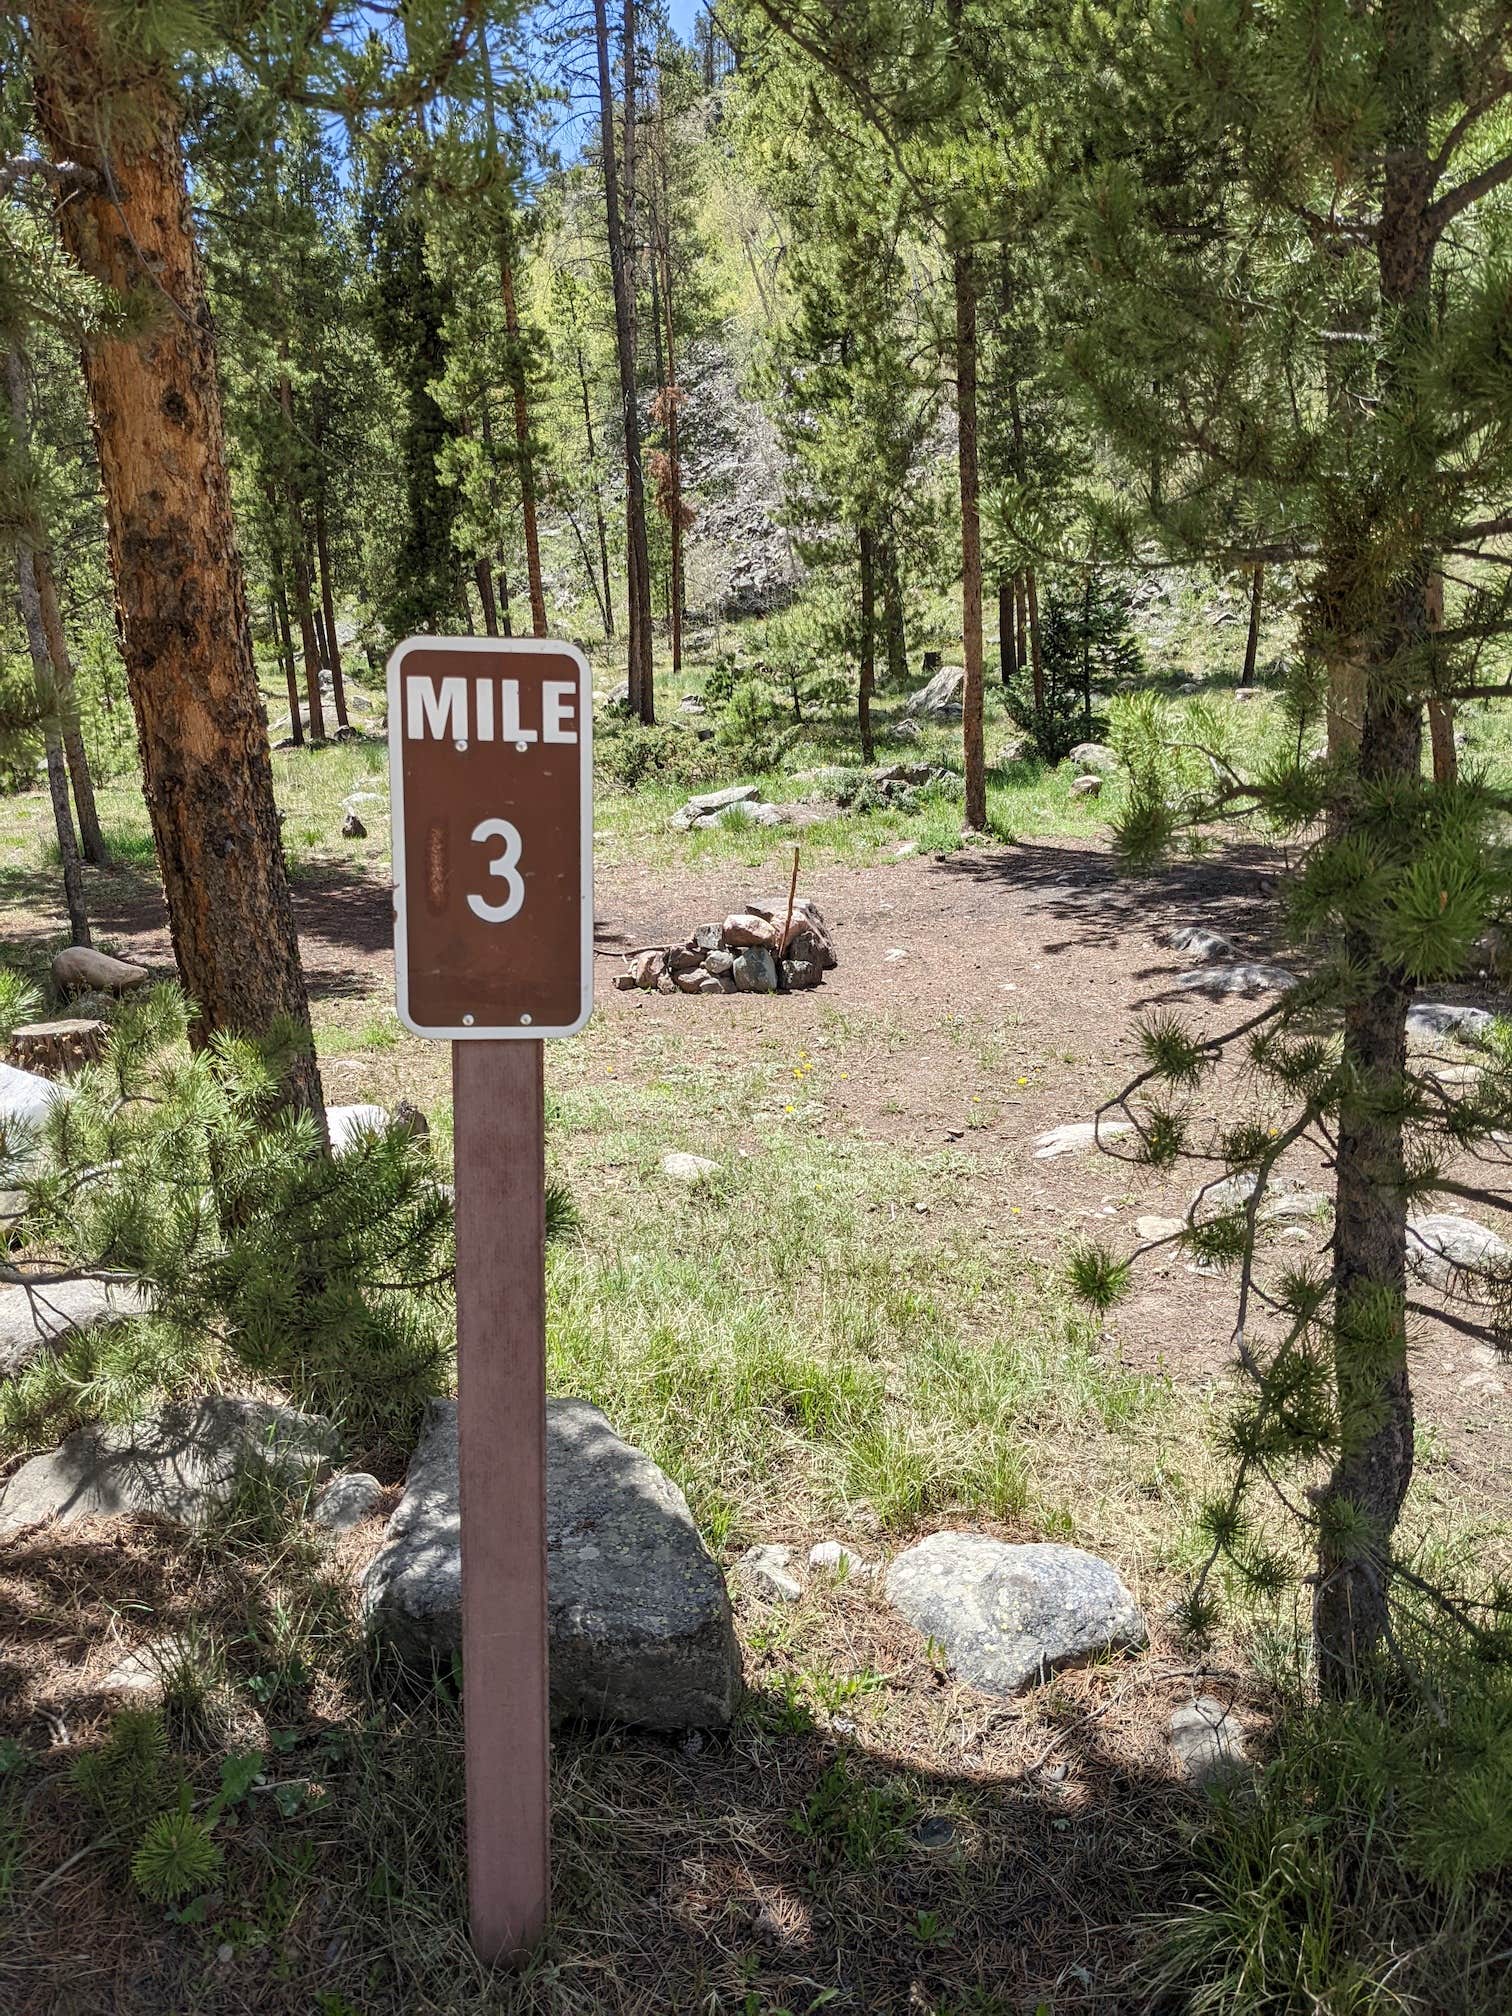 Camper submitted image from Homestake Reservoir Rd Milemarker 3 - Dispersed - 2